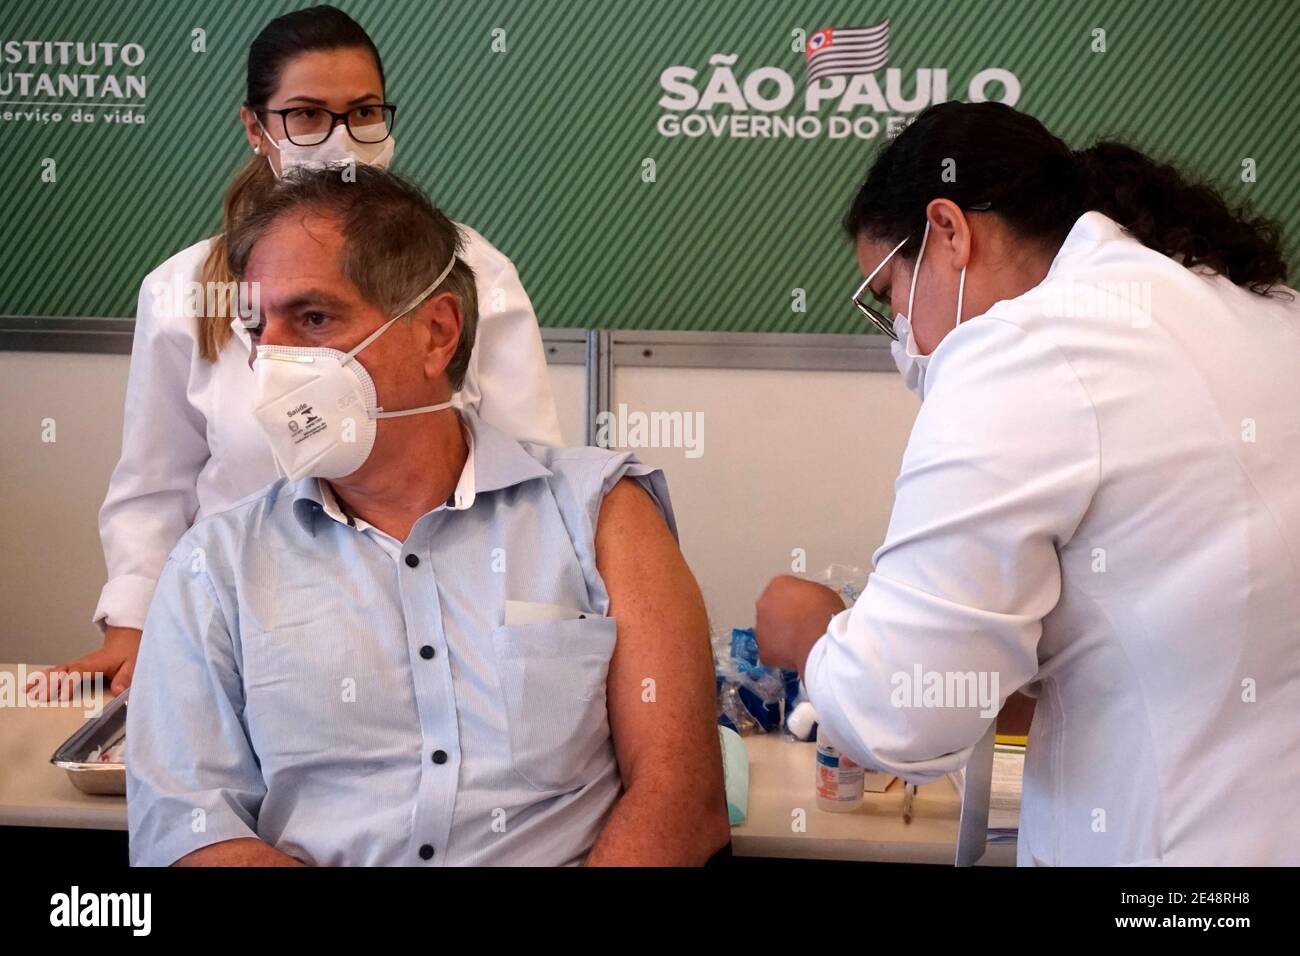 SÃ£O Paulo, SÃ£o Paulo, Brazil. 20th Jan, 2021. SÃ£o Paulo (SP), 20/01/2021 -COVID19, SAO PAULO, HC PROFESSIONAL VACCINATION HC: SP - Sao Paulo - Health professionals are vaccinated in SÃ£o Paulo in the Hospital das Clinicas, Faculty of Medicine, University of Sao Paulo, USP. The operation has a space of 1 thousand square meters, 30 vaccination stations and 12 hours daily, from 7 am to 7 pm for everyone to receive the first dose of the compound. Credit: Cris Faga/ZUMA Wire/Alamy Live News Stock Photo